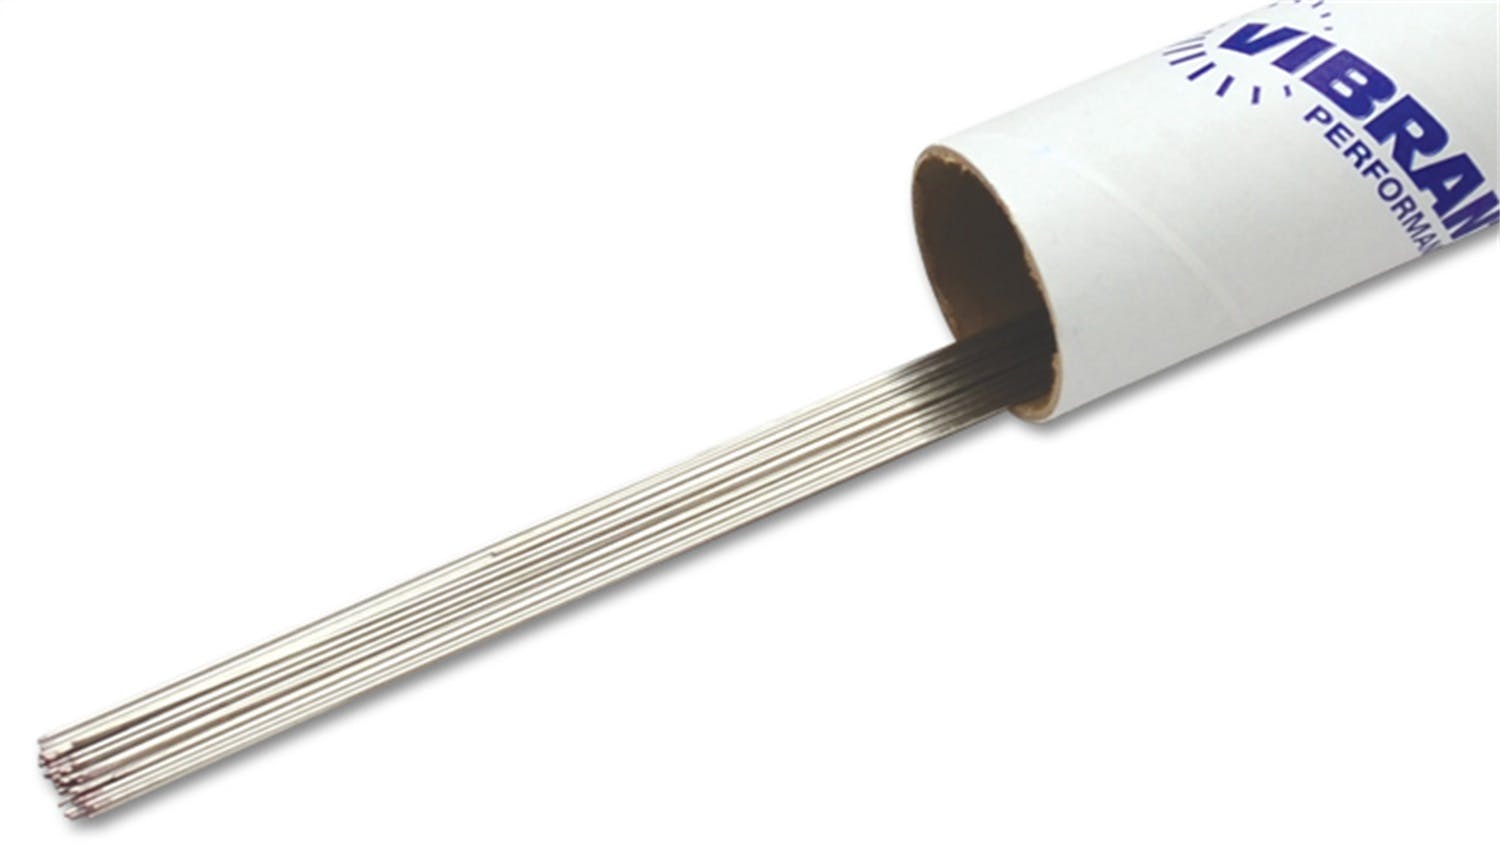 Vibrant Performance 29141 Wire Stainless Steel ER308L - 0.045 inch Thick (1.2mm) - 39.5 inch Long Rod - 1lb box